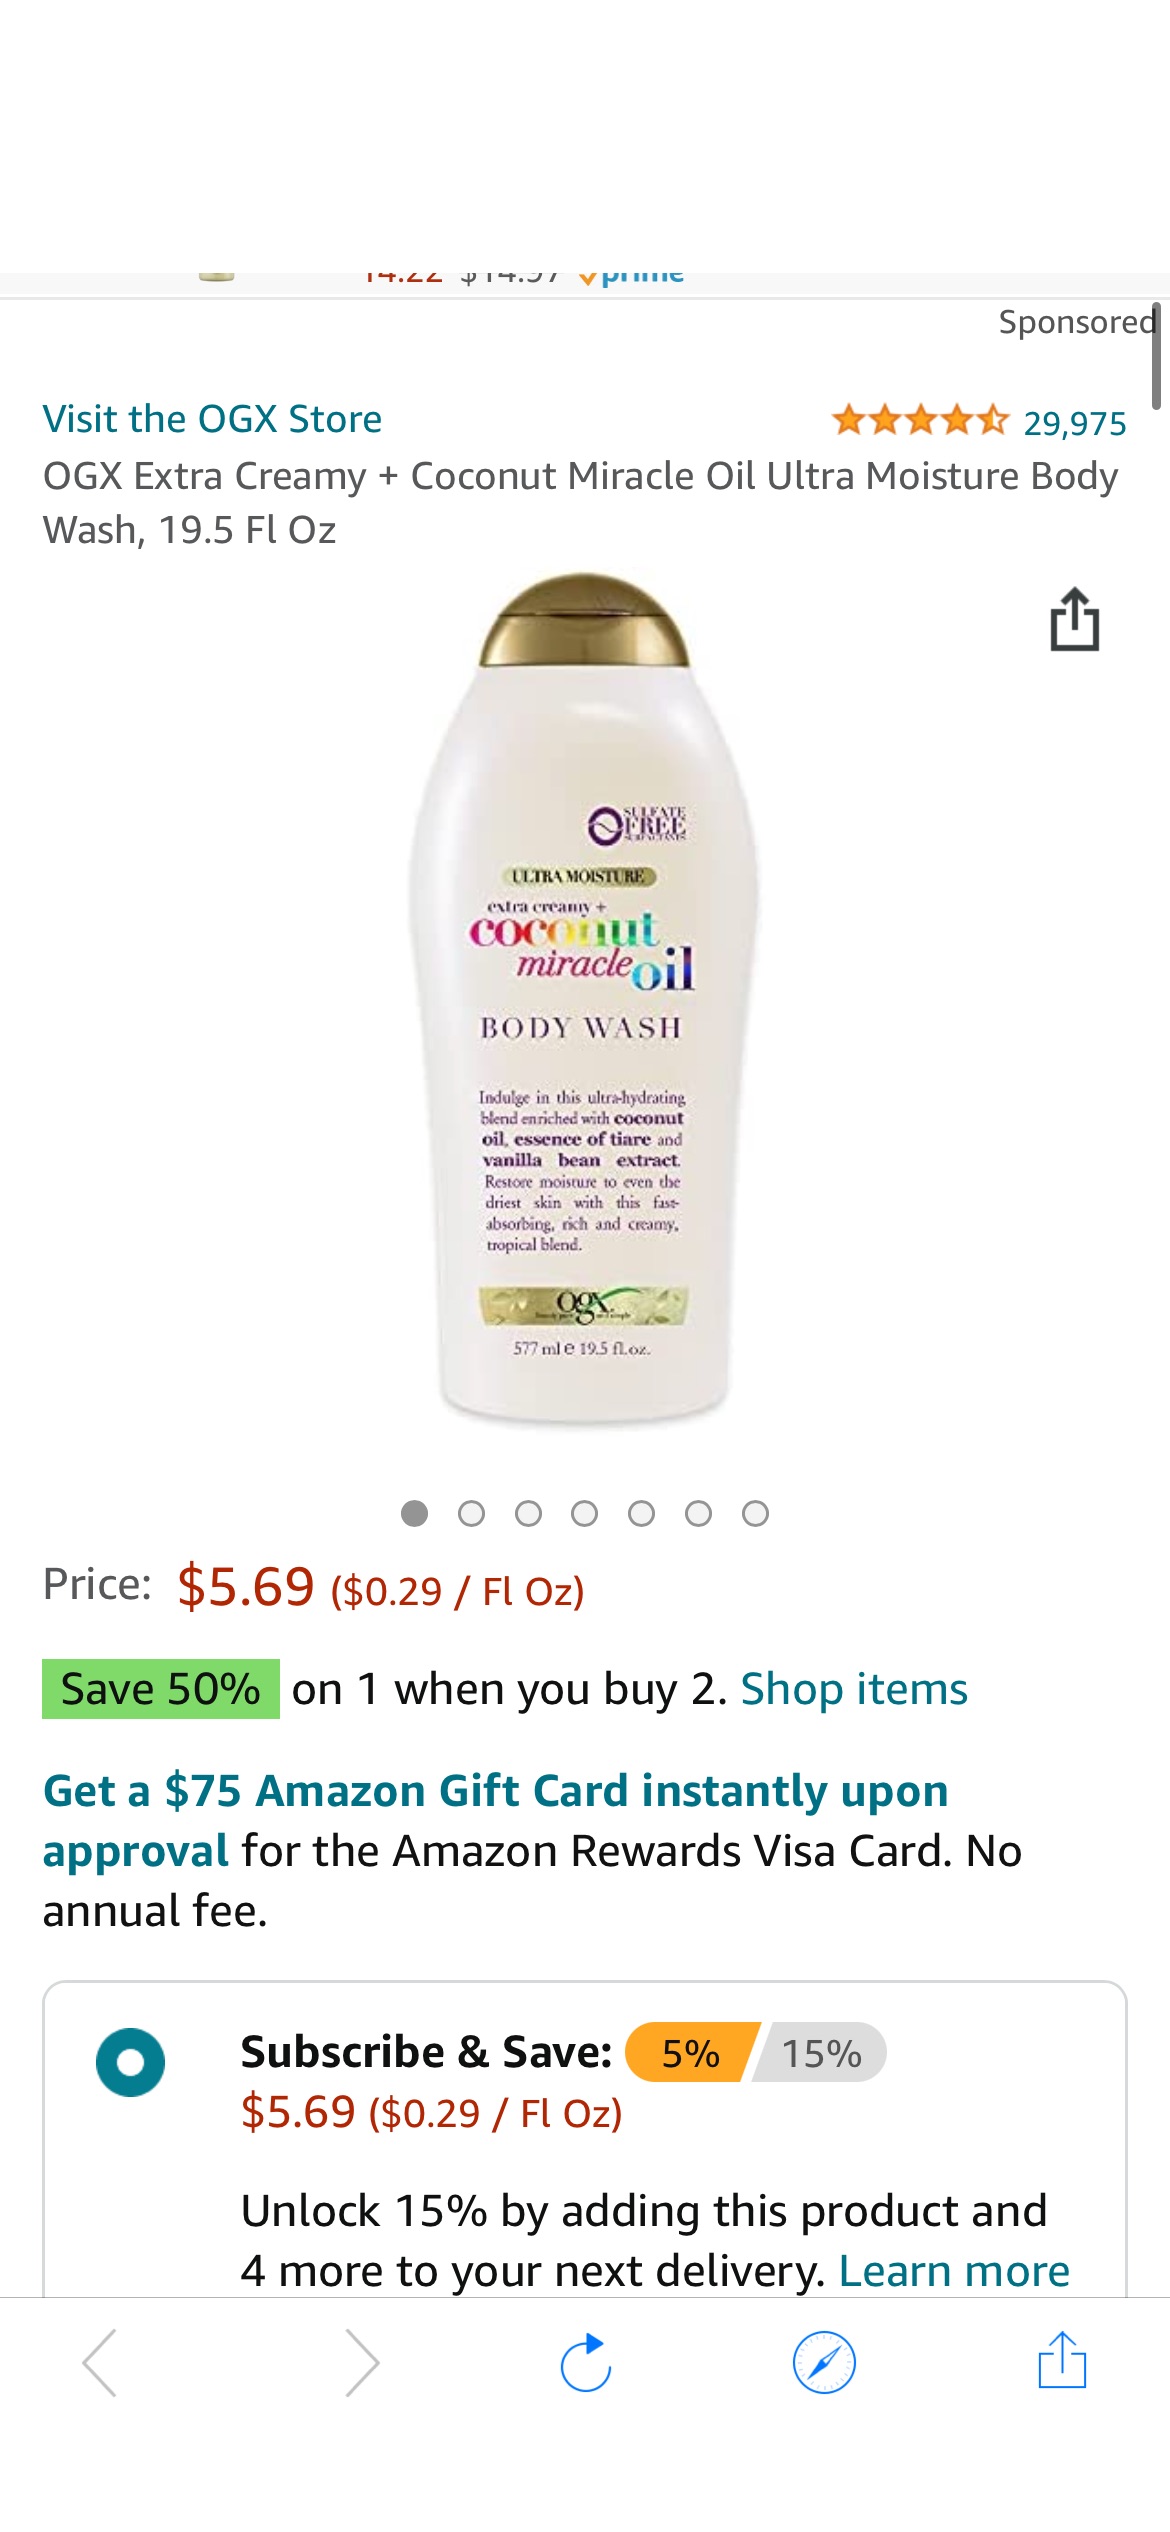 Amazon.com : OGX Extra Creamy + Coconut Miracle Oil Ultra Moisture Body Wash, 19.5 Fl Oz : Beauty & Personal Care 沐浴露第二件半价